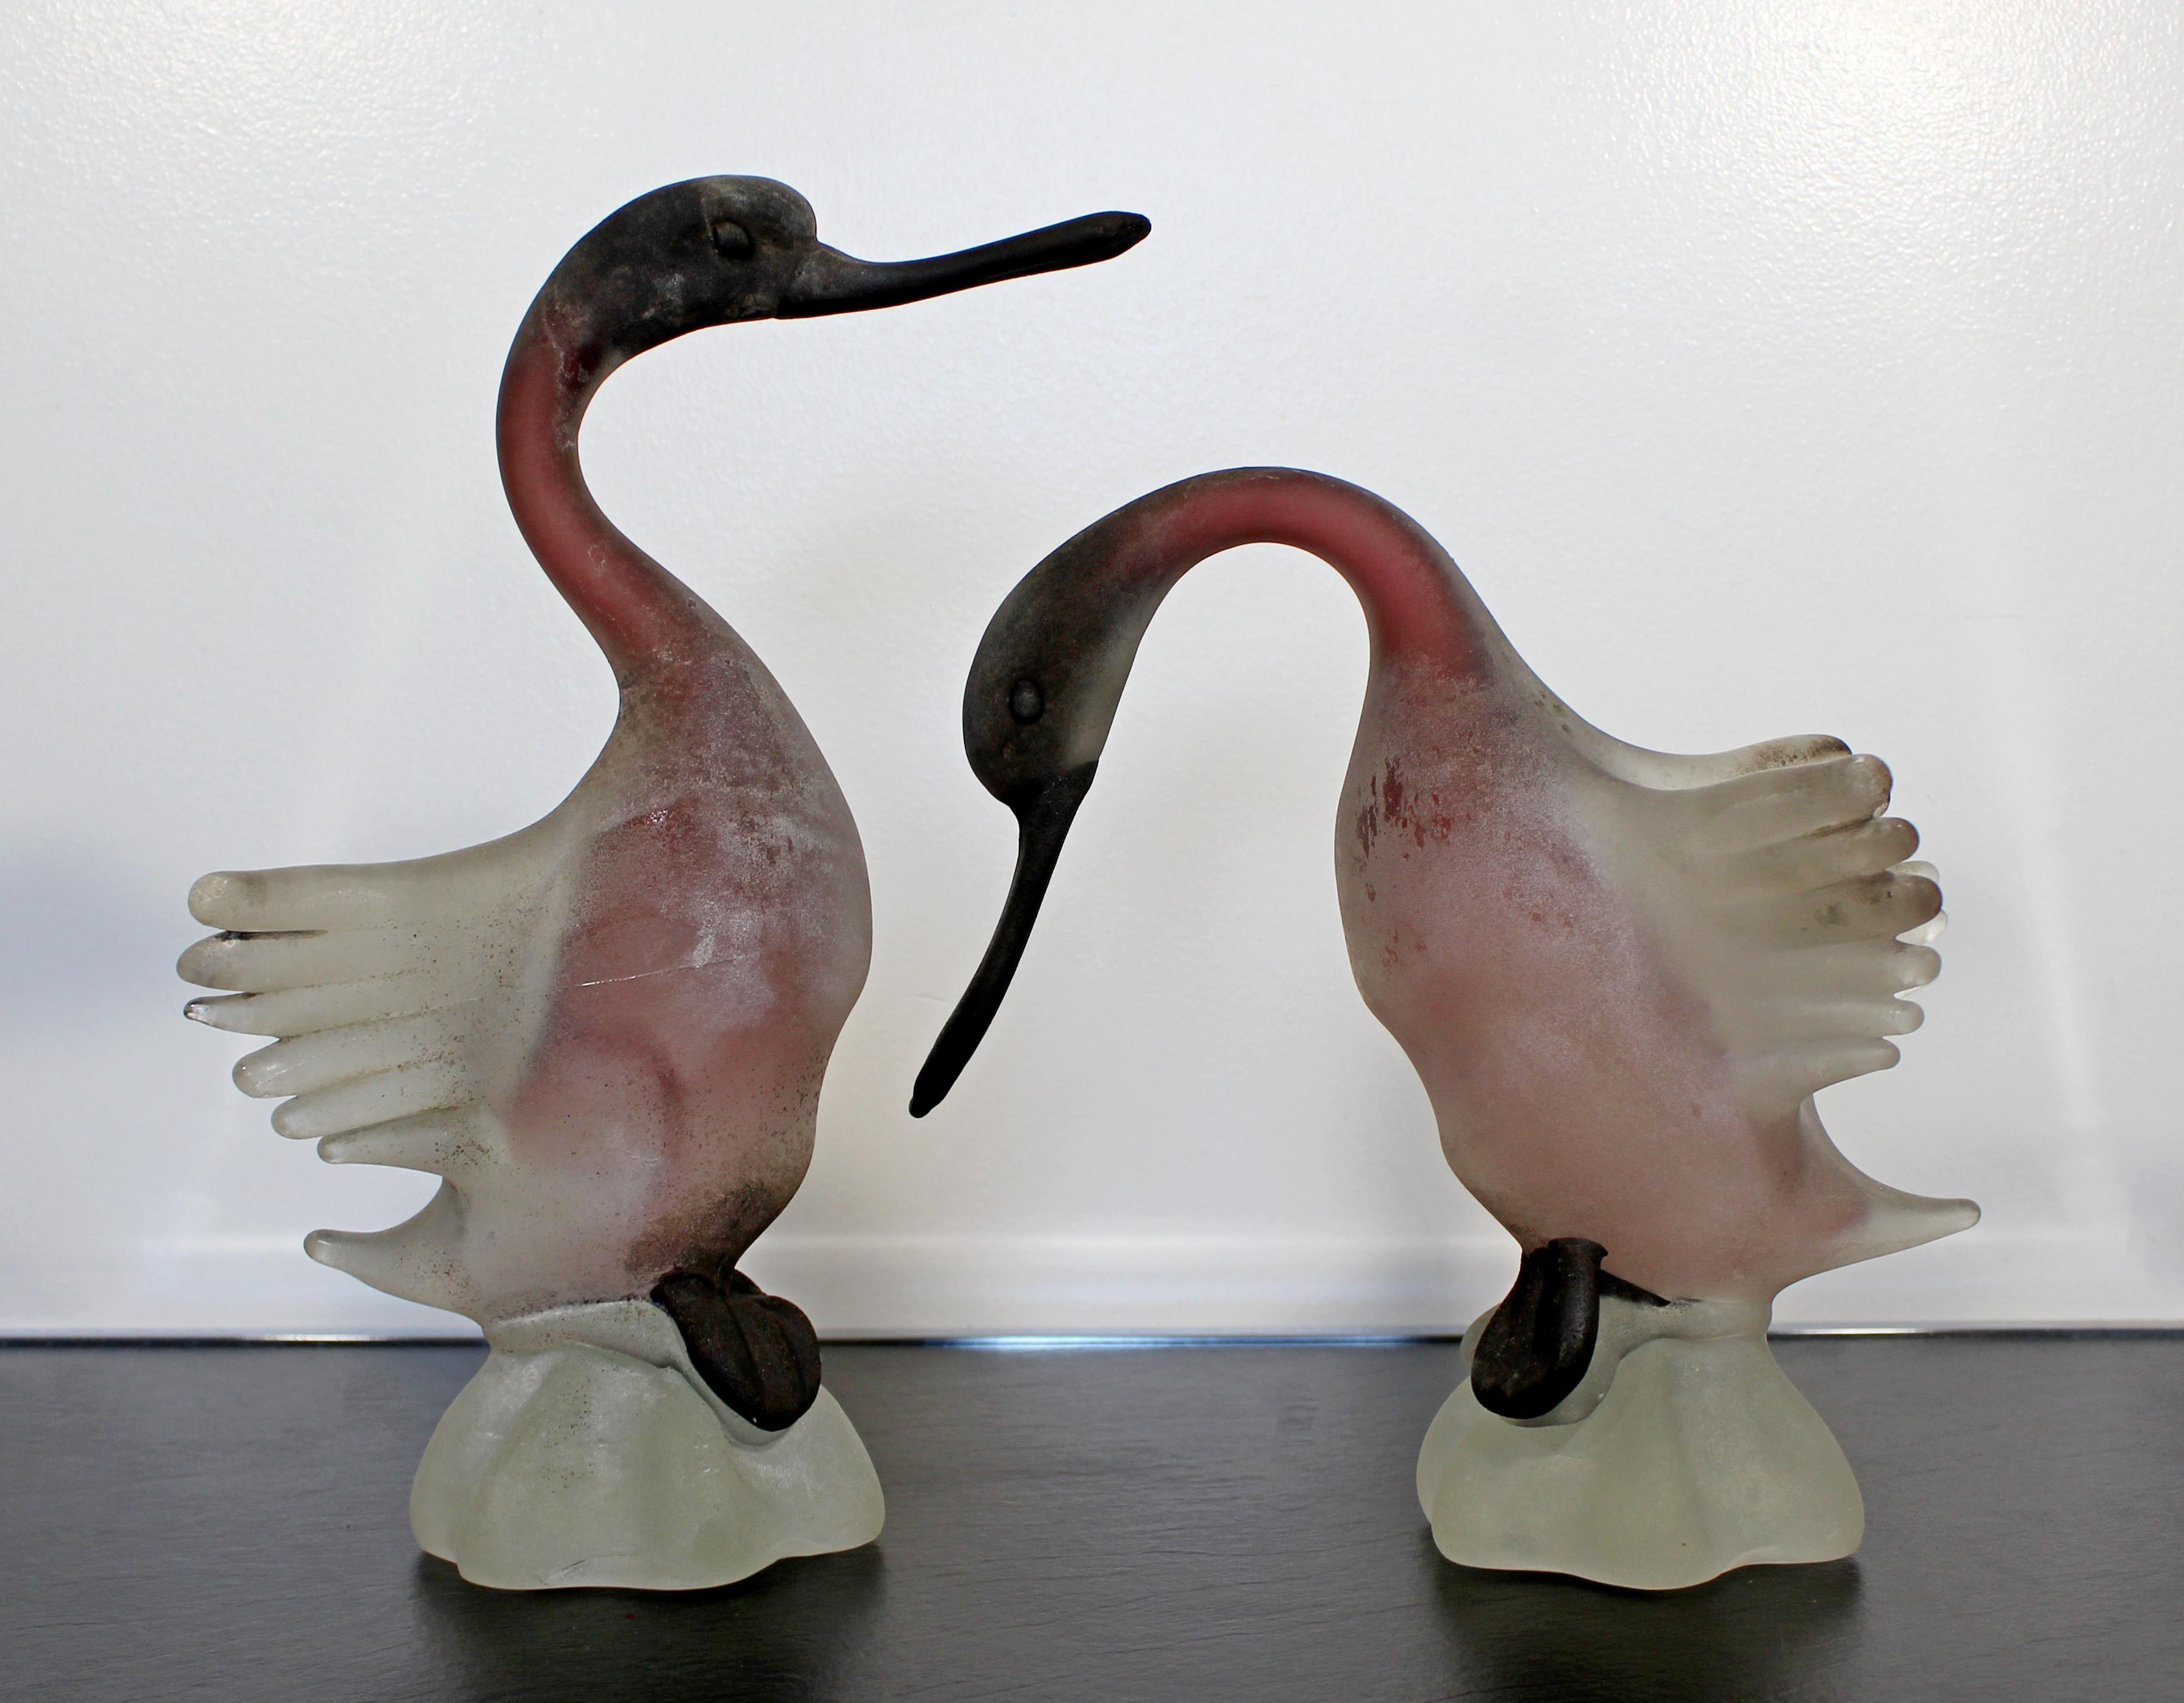 Italian Mid-Century Modern Cenedese Pair of Frosted Glass Geese Table Sculptures Murano